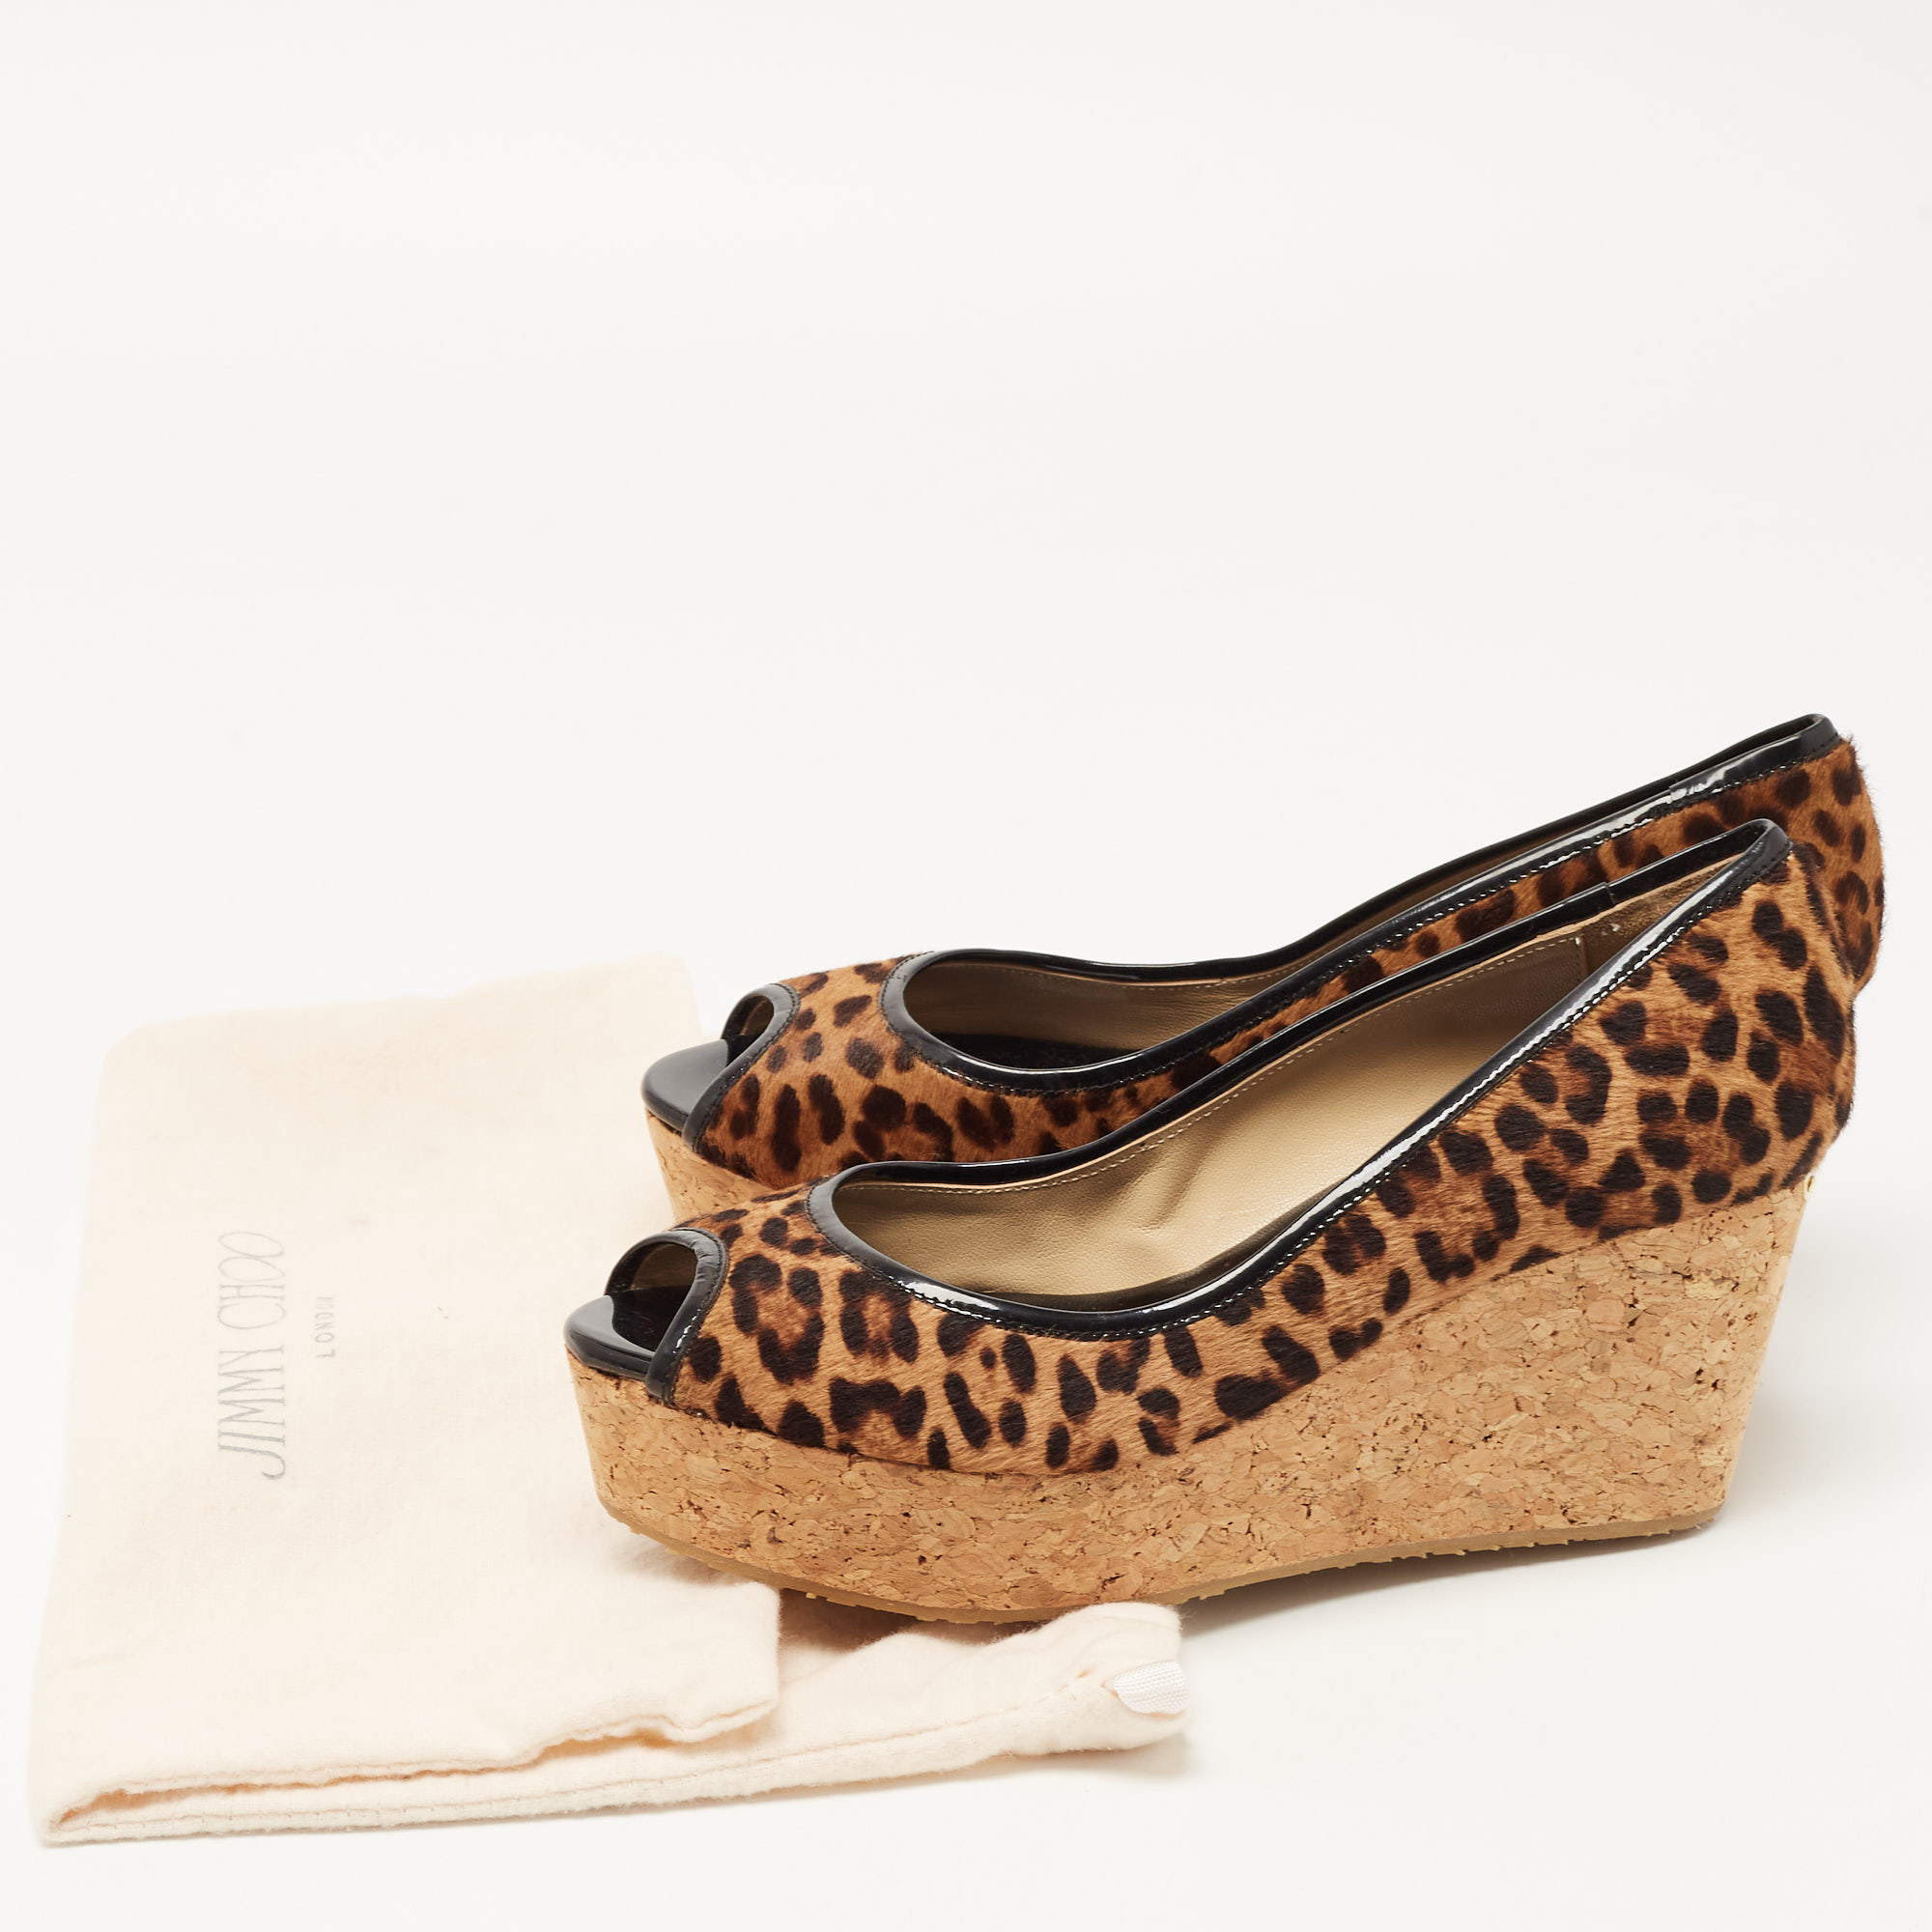 Jimmy Choo Leopard Print Calf Hair And Patent Trim Papina Cork Wedge Pumps Size 38